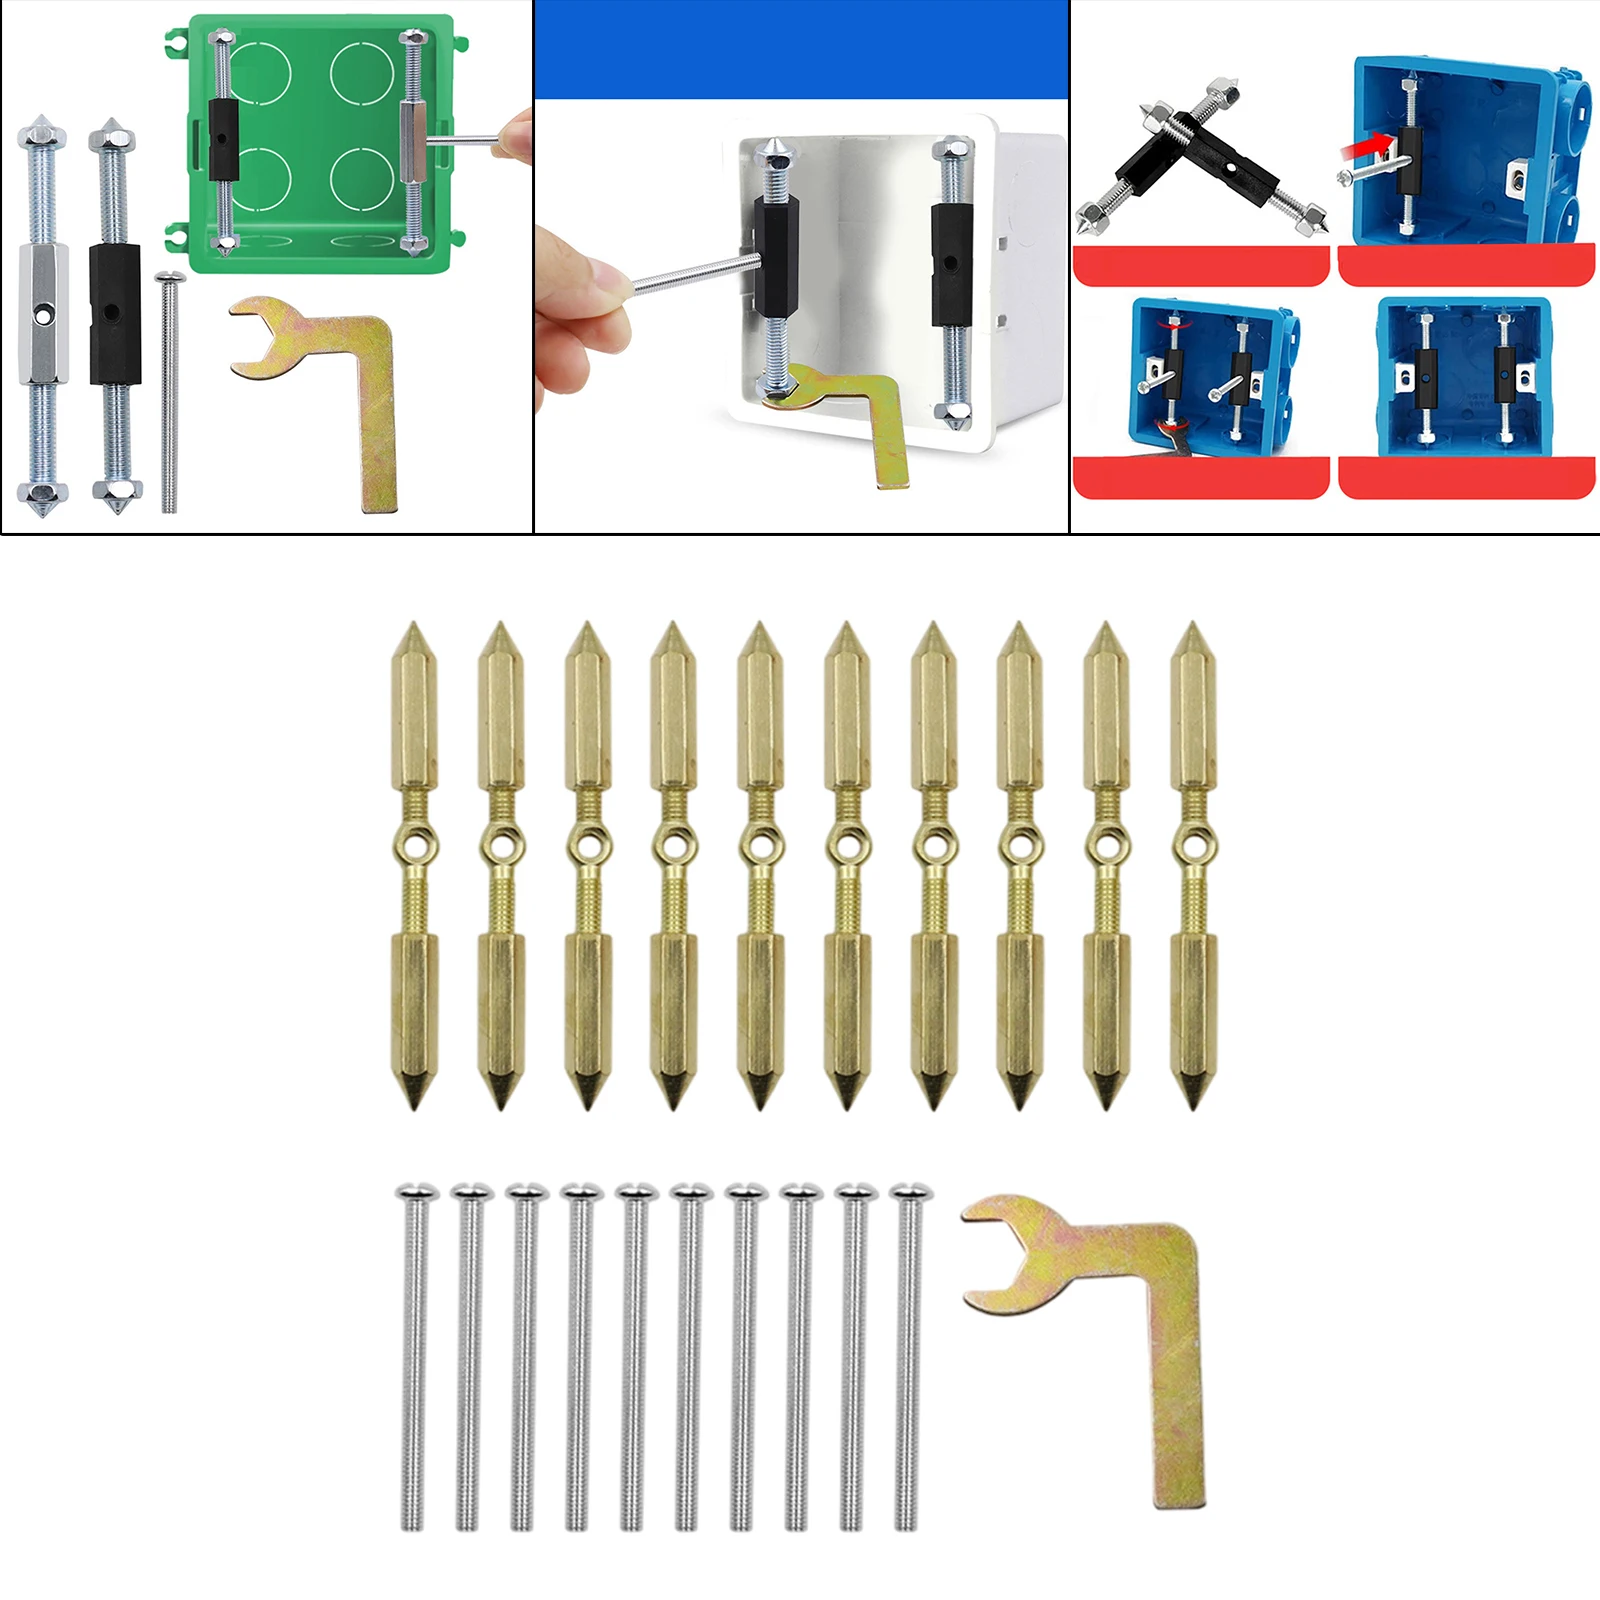 21Pcs/Set Cassette Screws Support Rod Kit, Repair Tool, Rust Resistant Adjustable Fixer Wrench for Wall Switch Junction Box